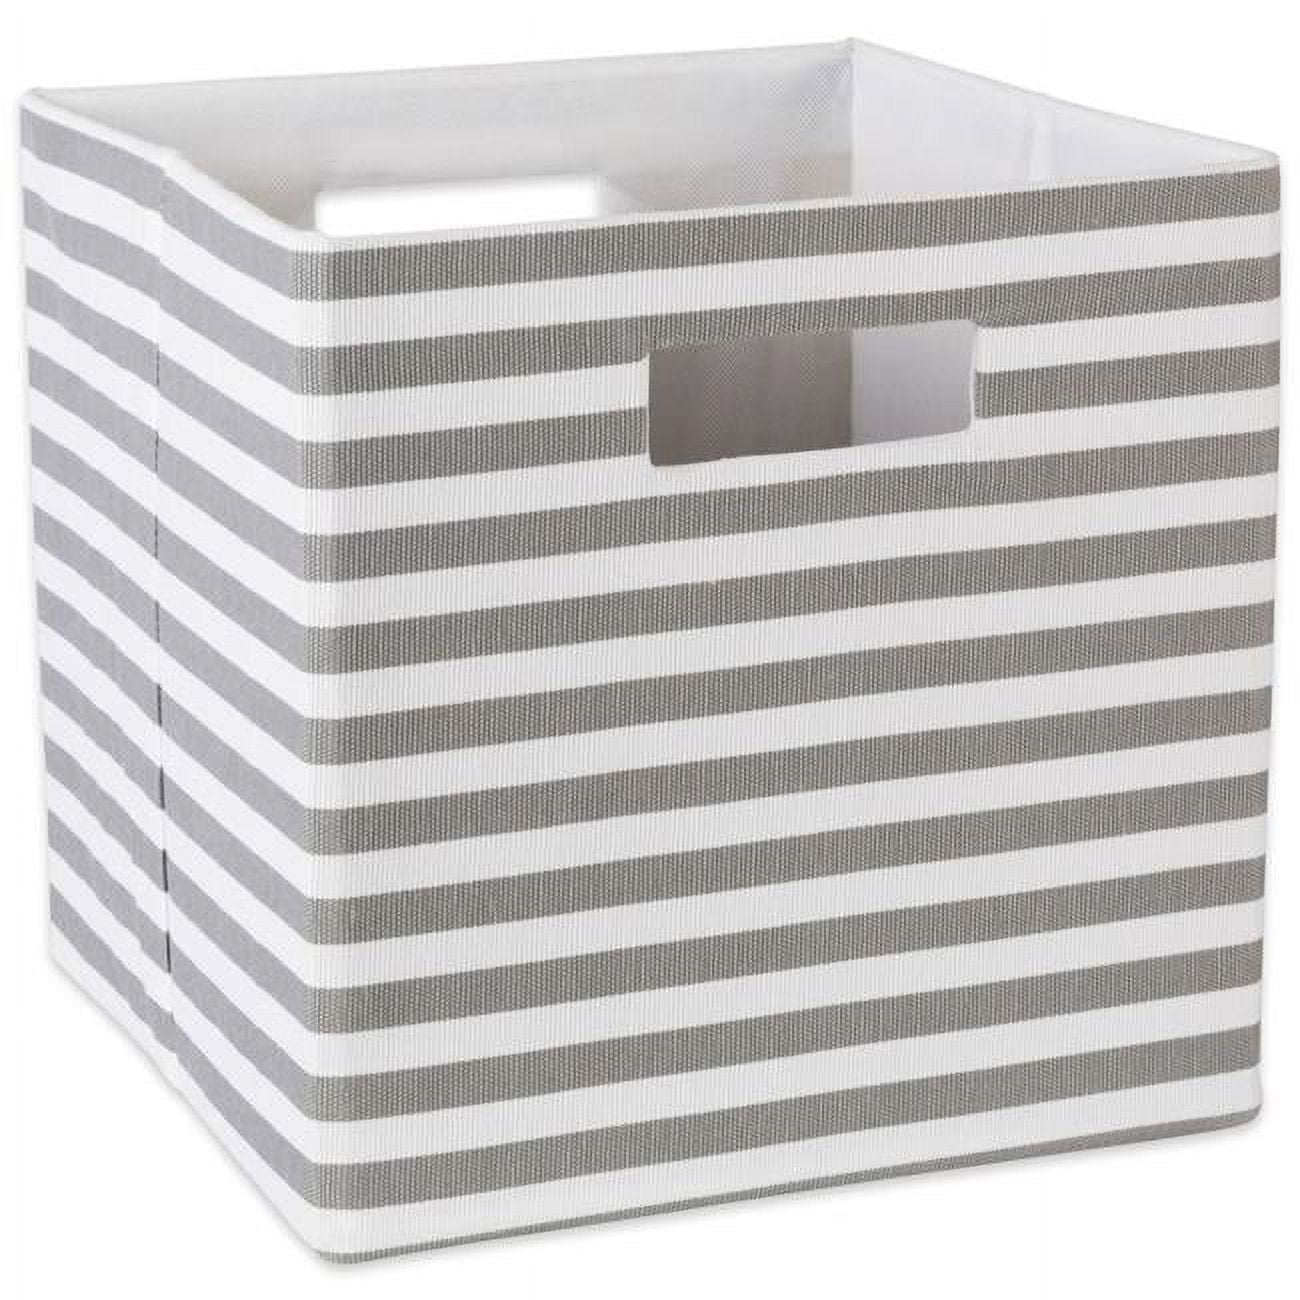 Design Imports Camz10601 11 X 11 X 11 In. Pinstripe Square Polyester Storage Cube, Grey